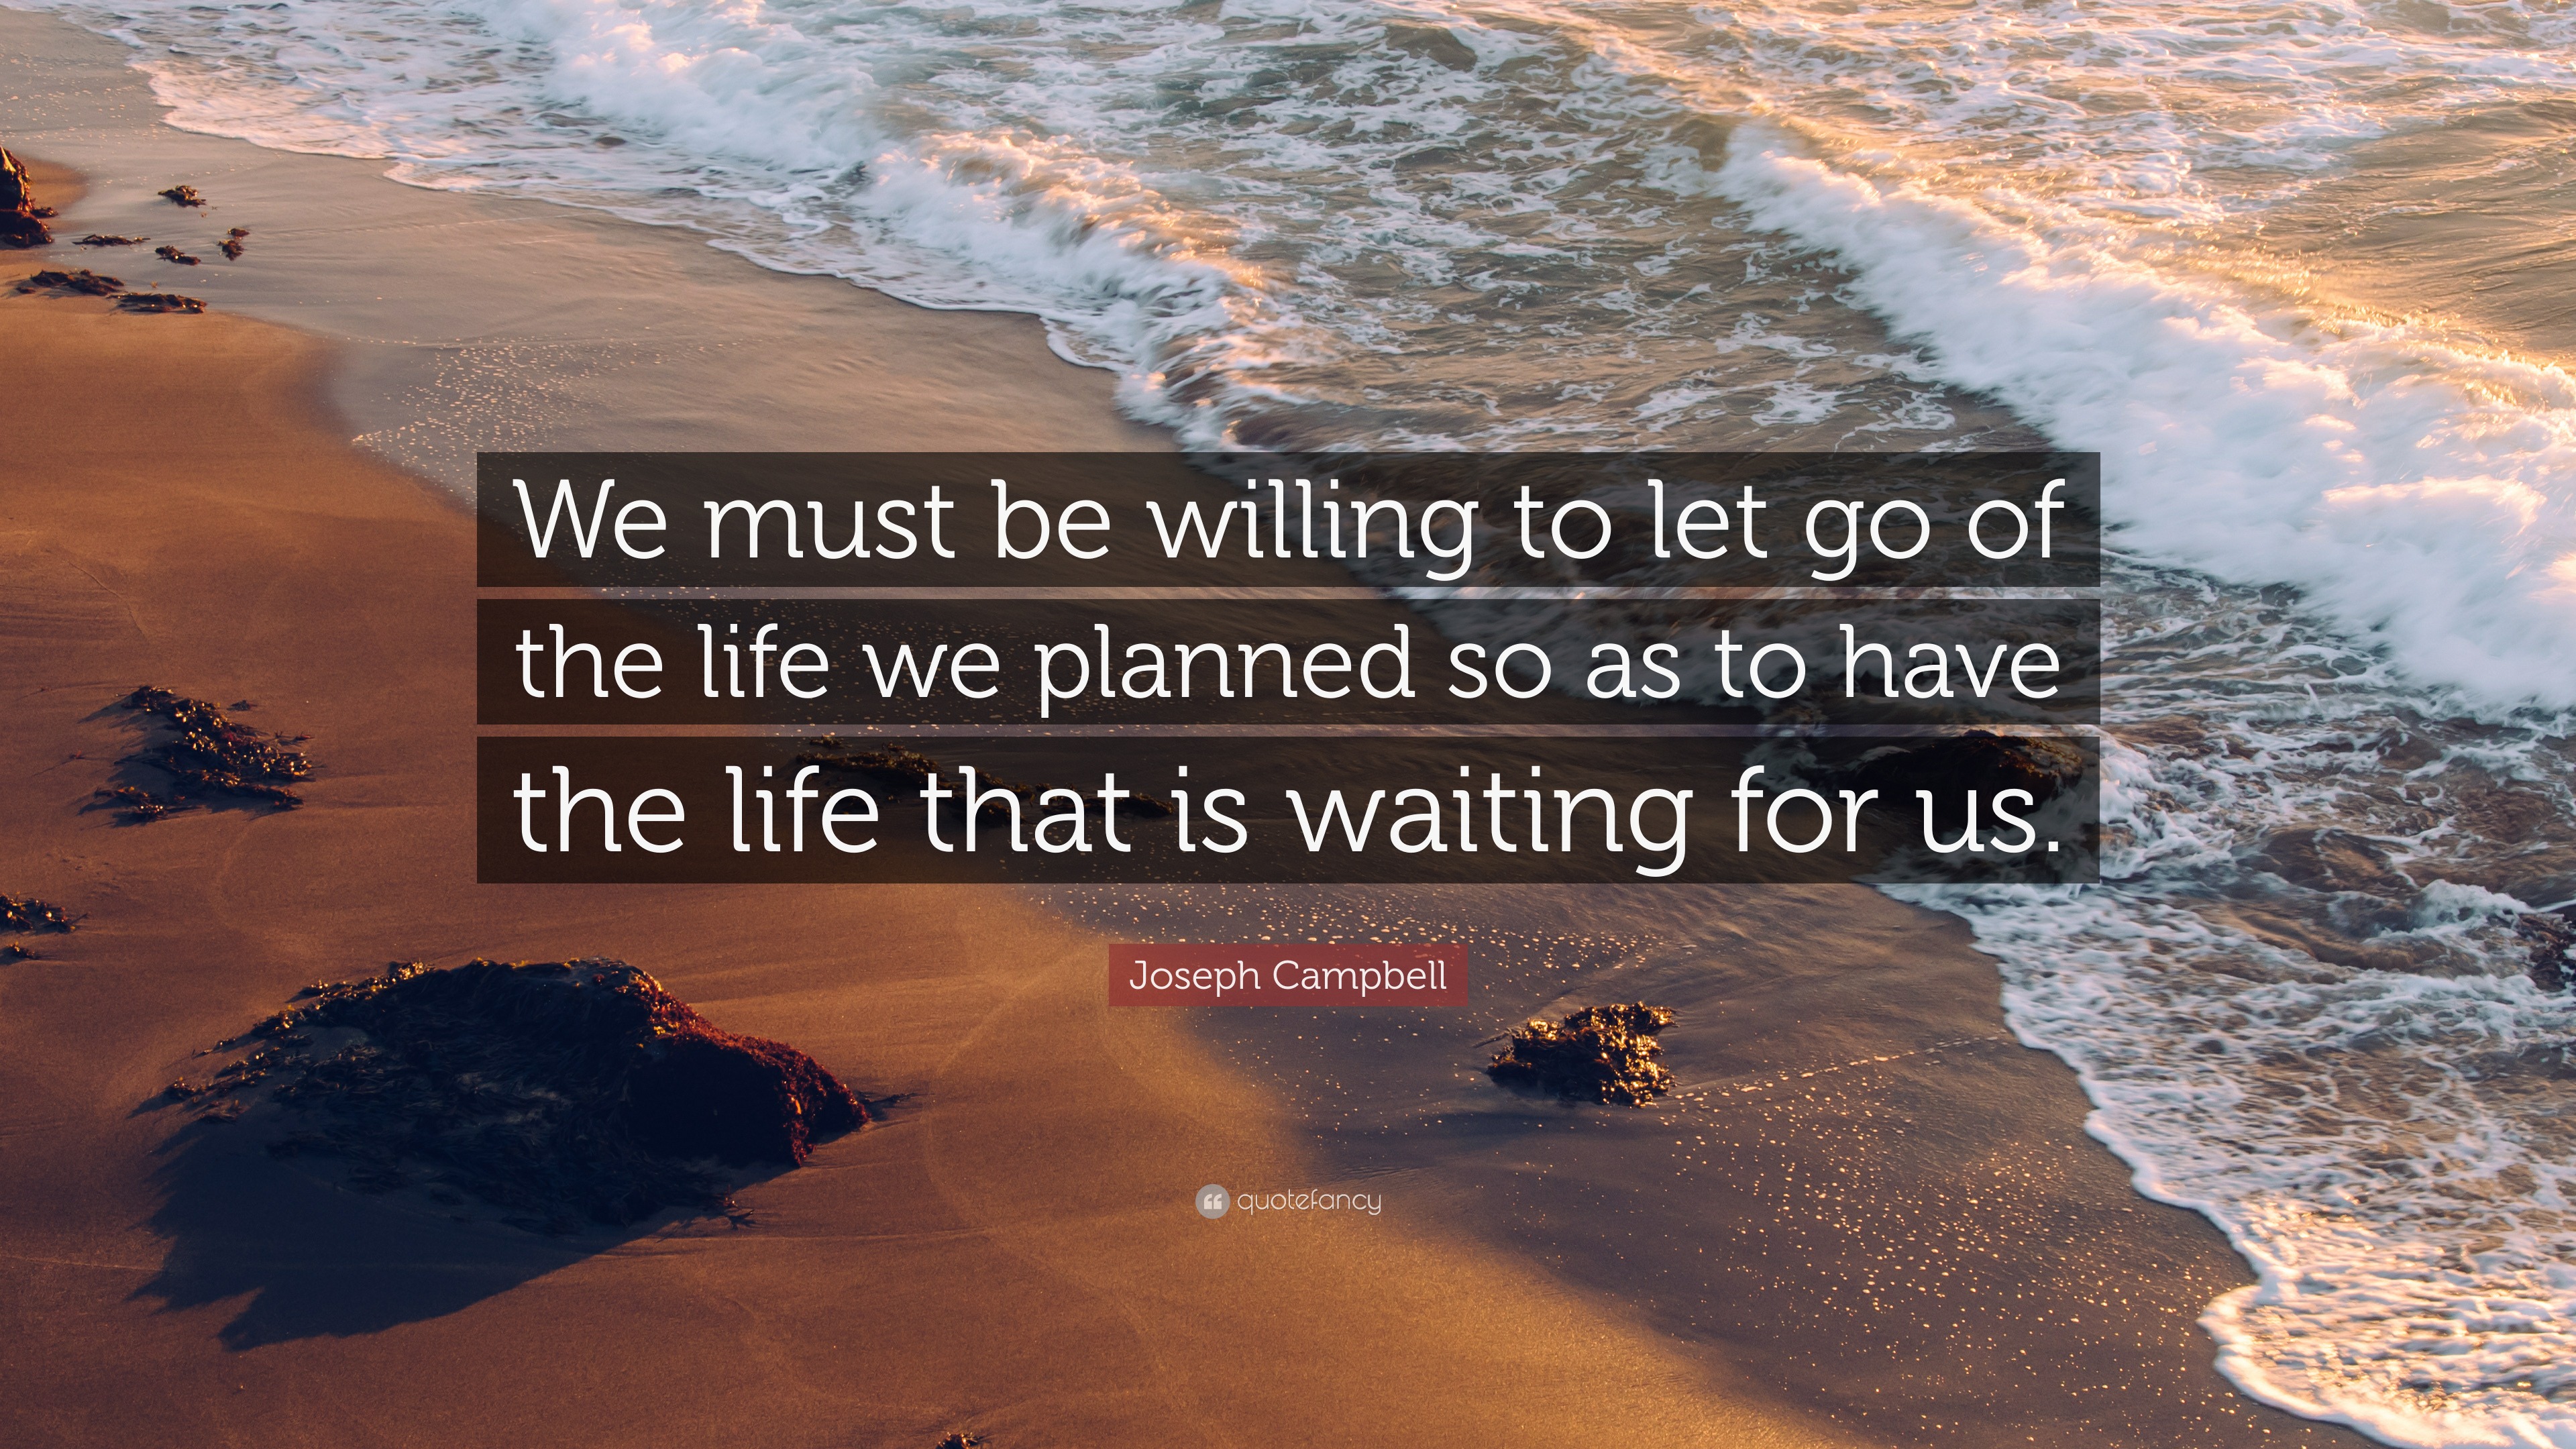 2004565 Joseph Campbell Quote We must be willing to let go of the life we